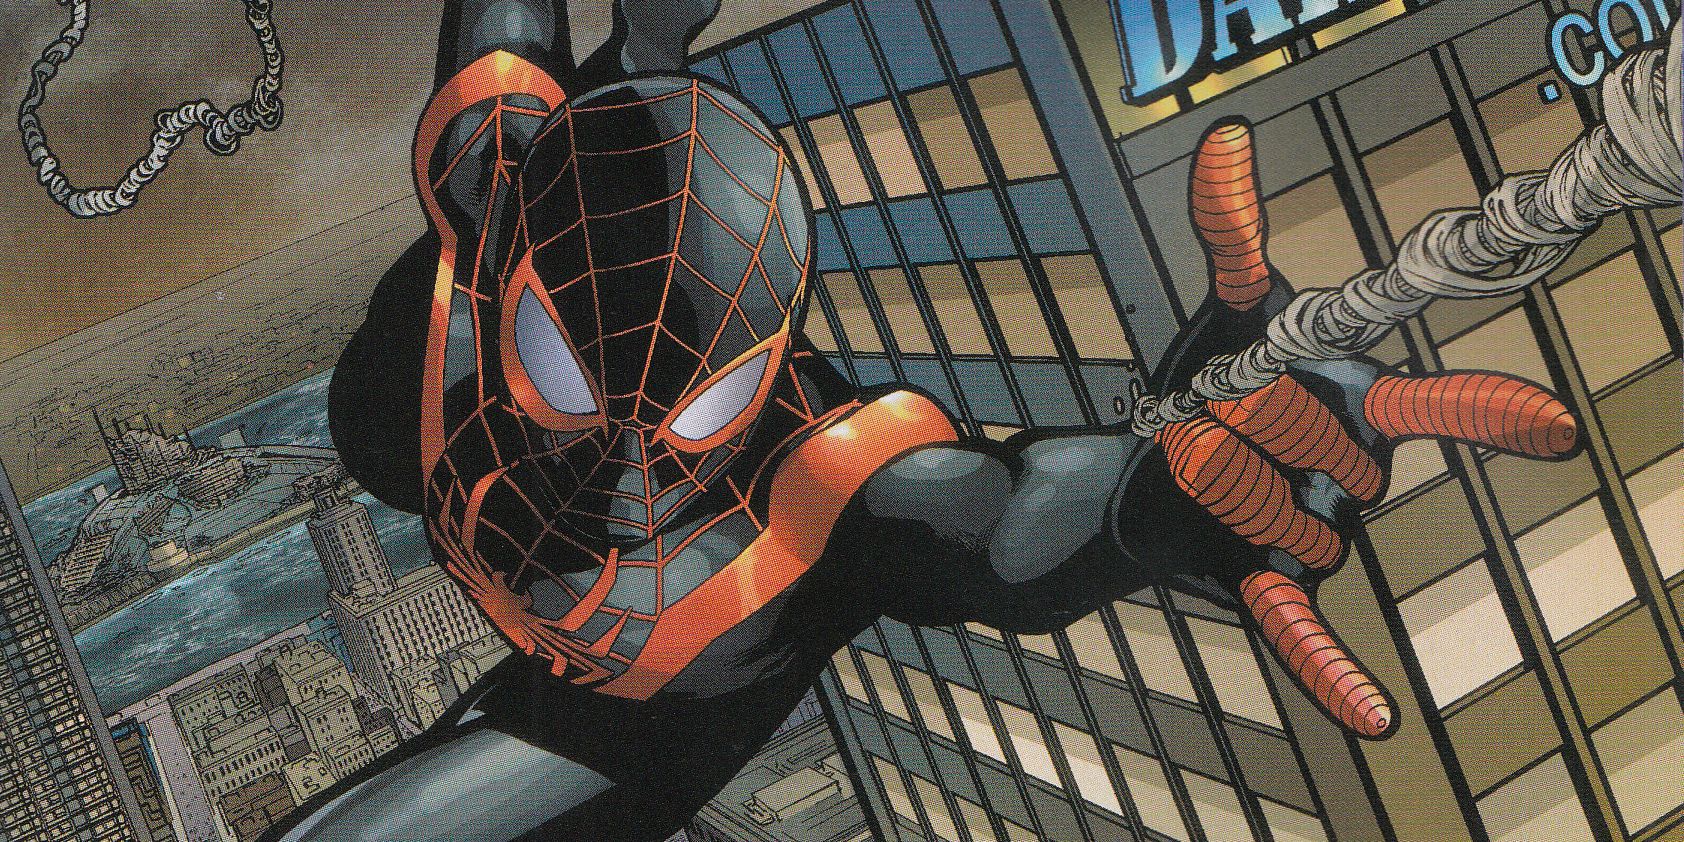 Miles Morales swinging through the city as Spider-Man